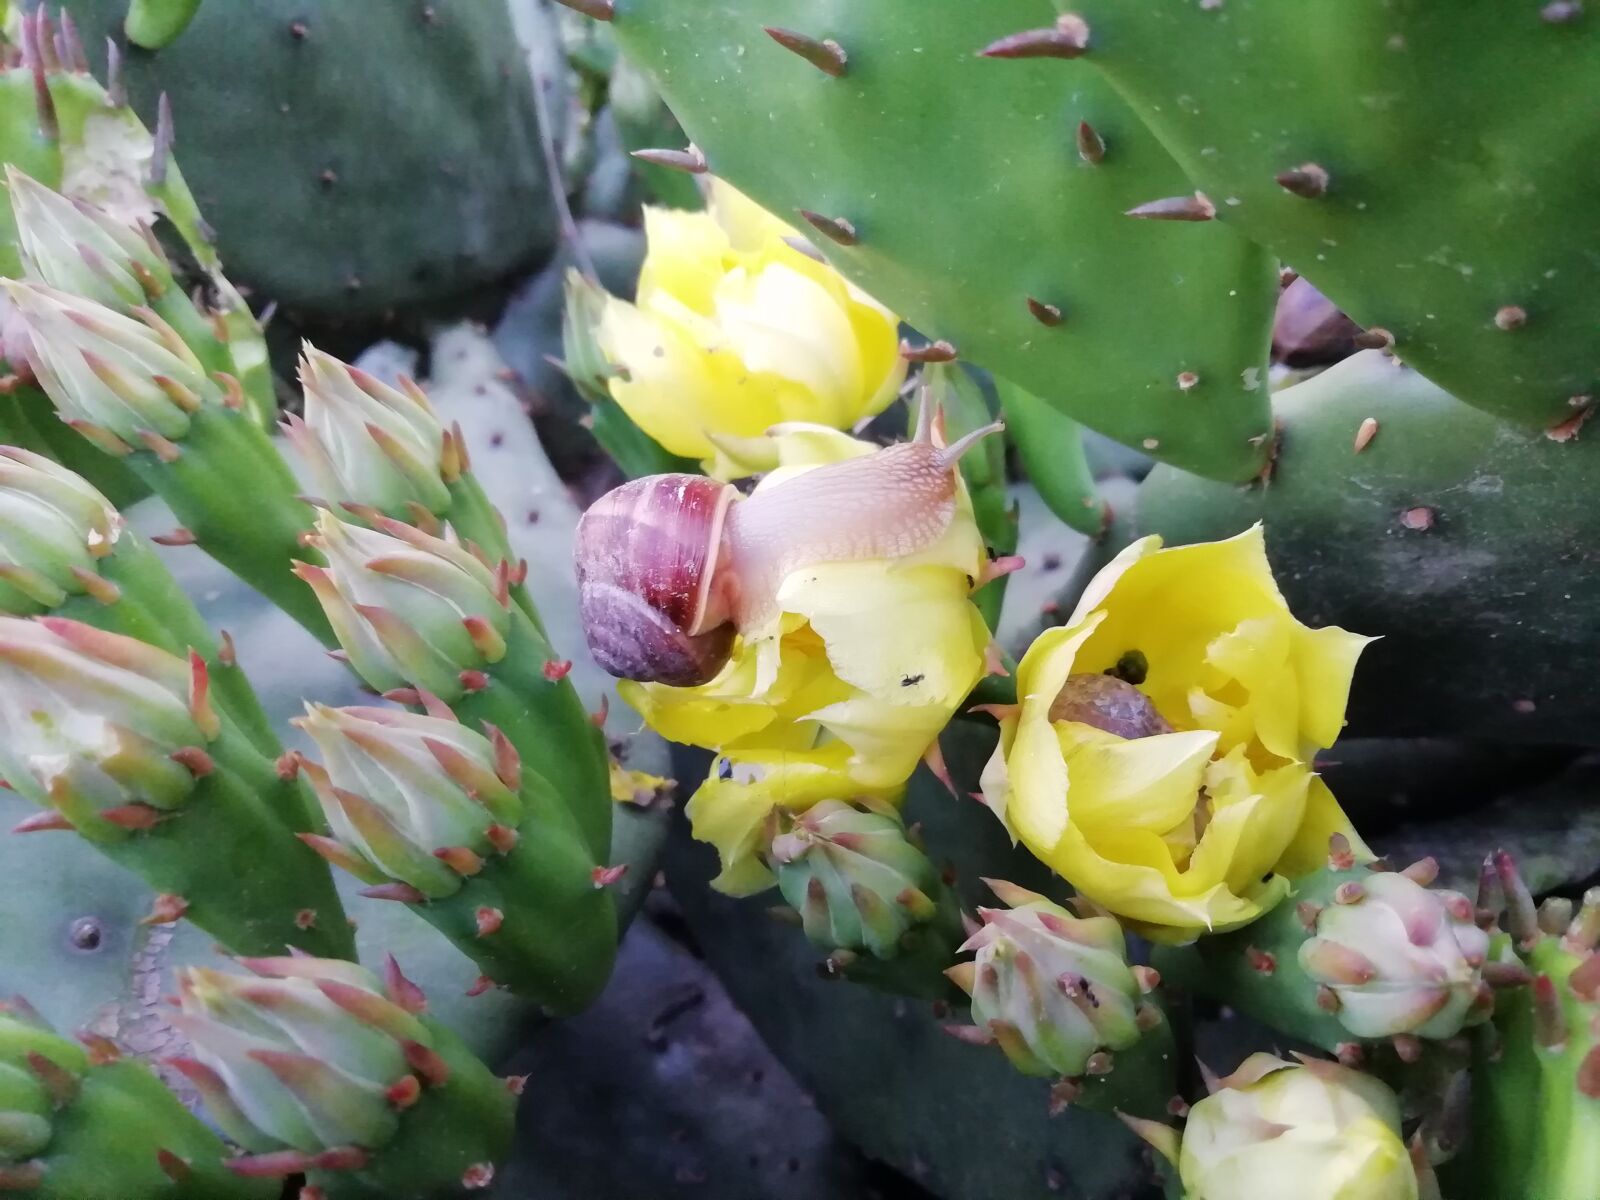 HUAWEI Honor 9 Lite sample photo. Cactus flowers, snail, green photography